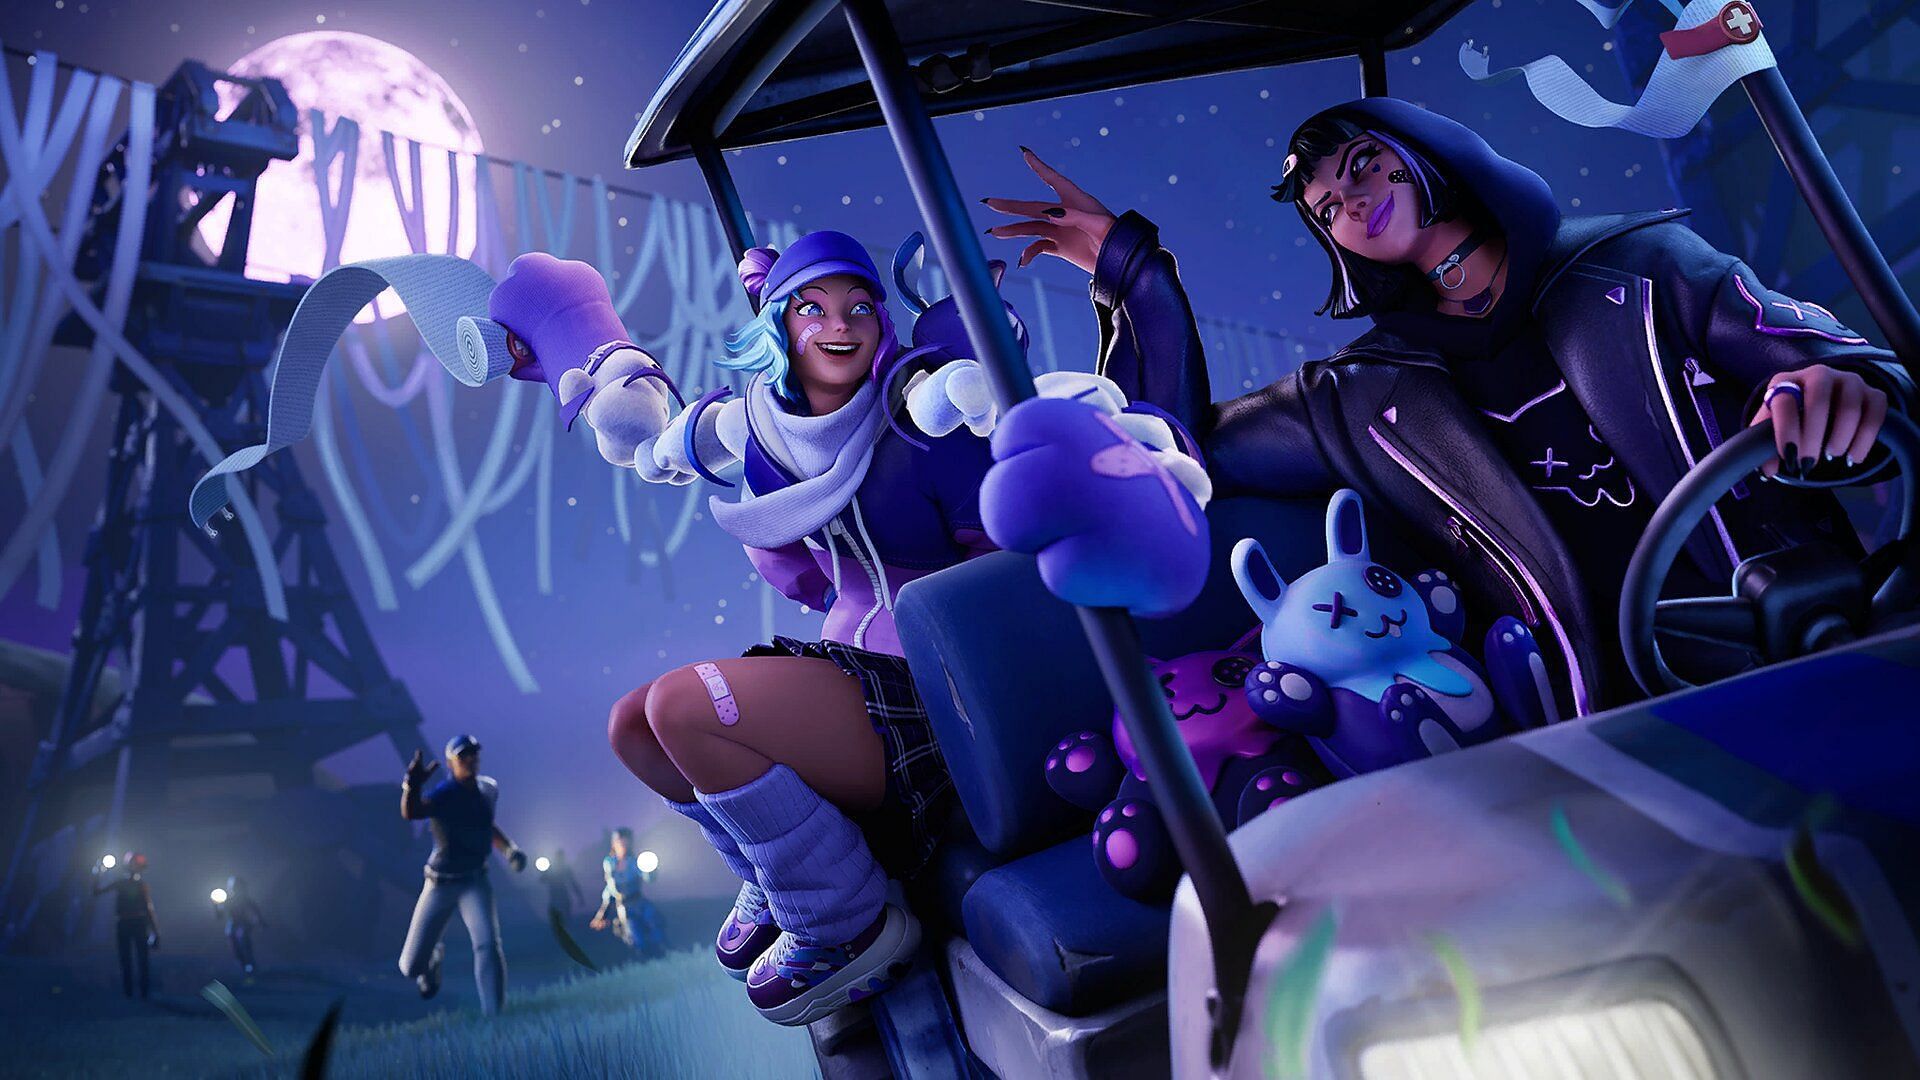 Fortnite community lists the most humiliating things to happen to them in-game